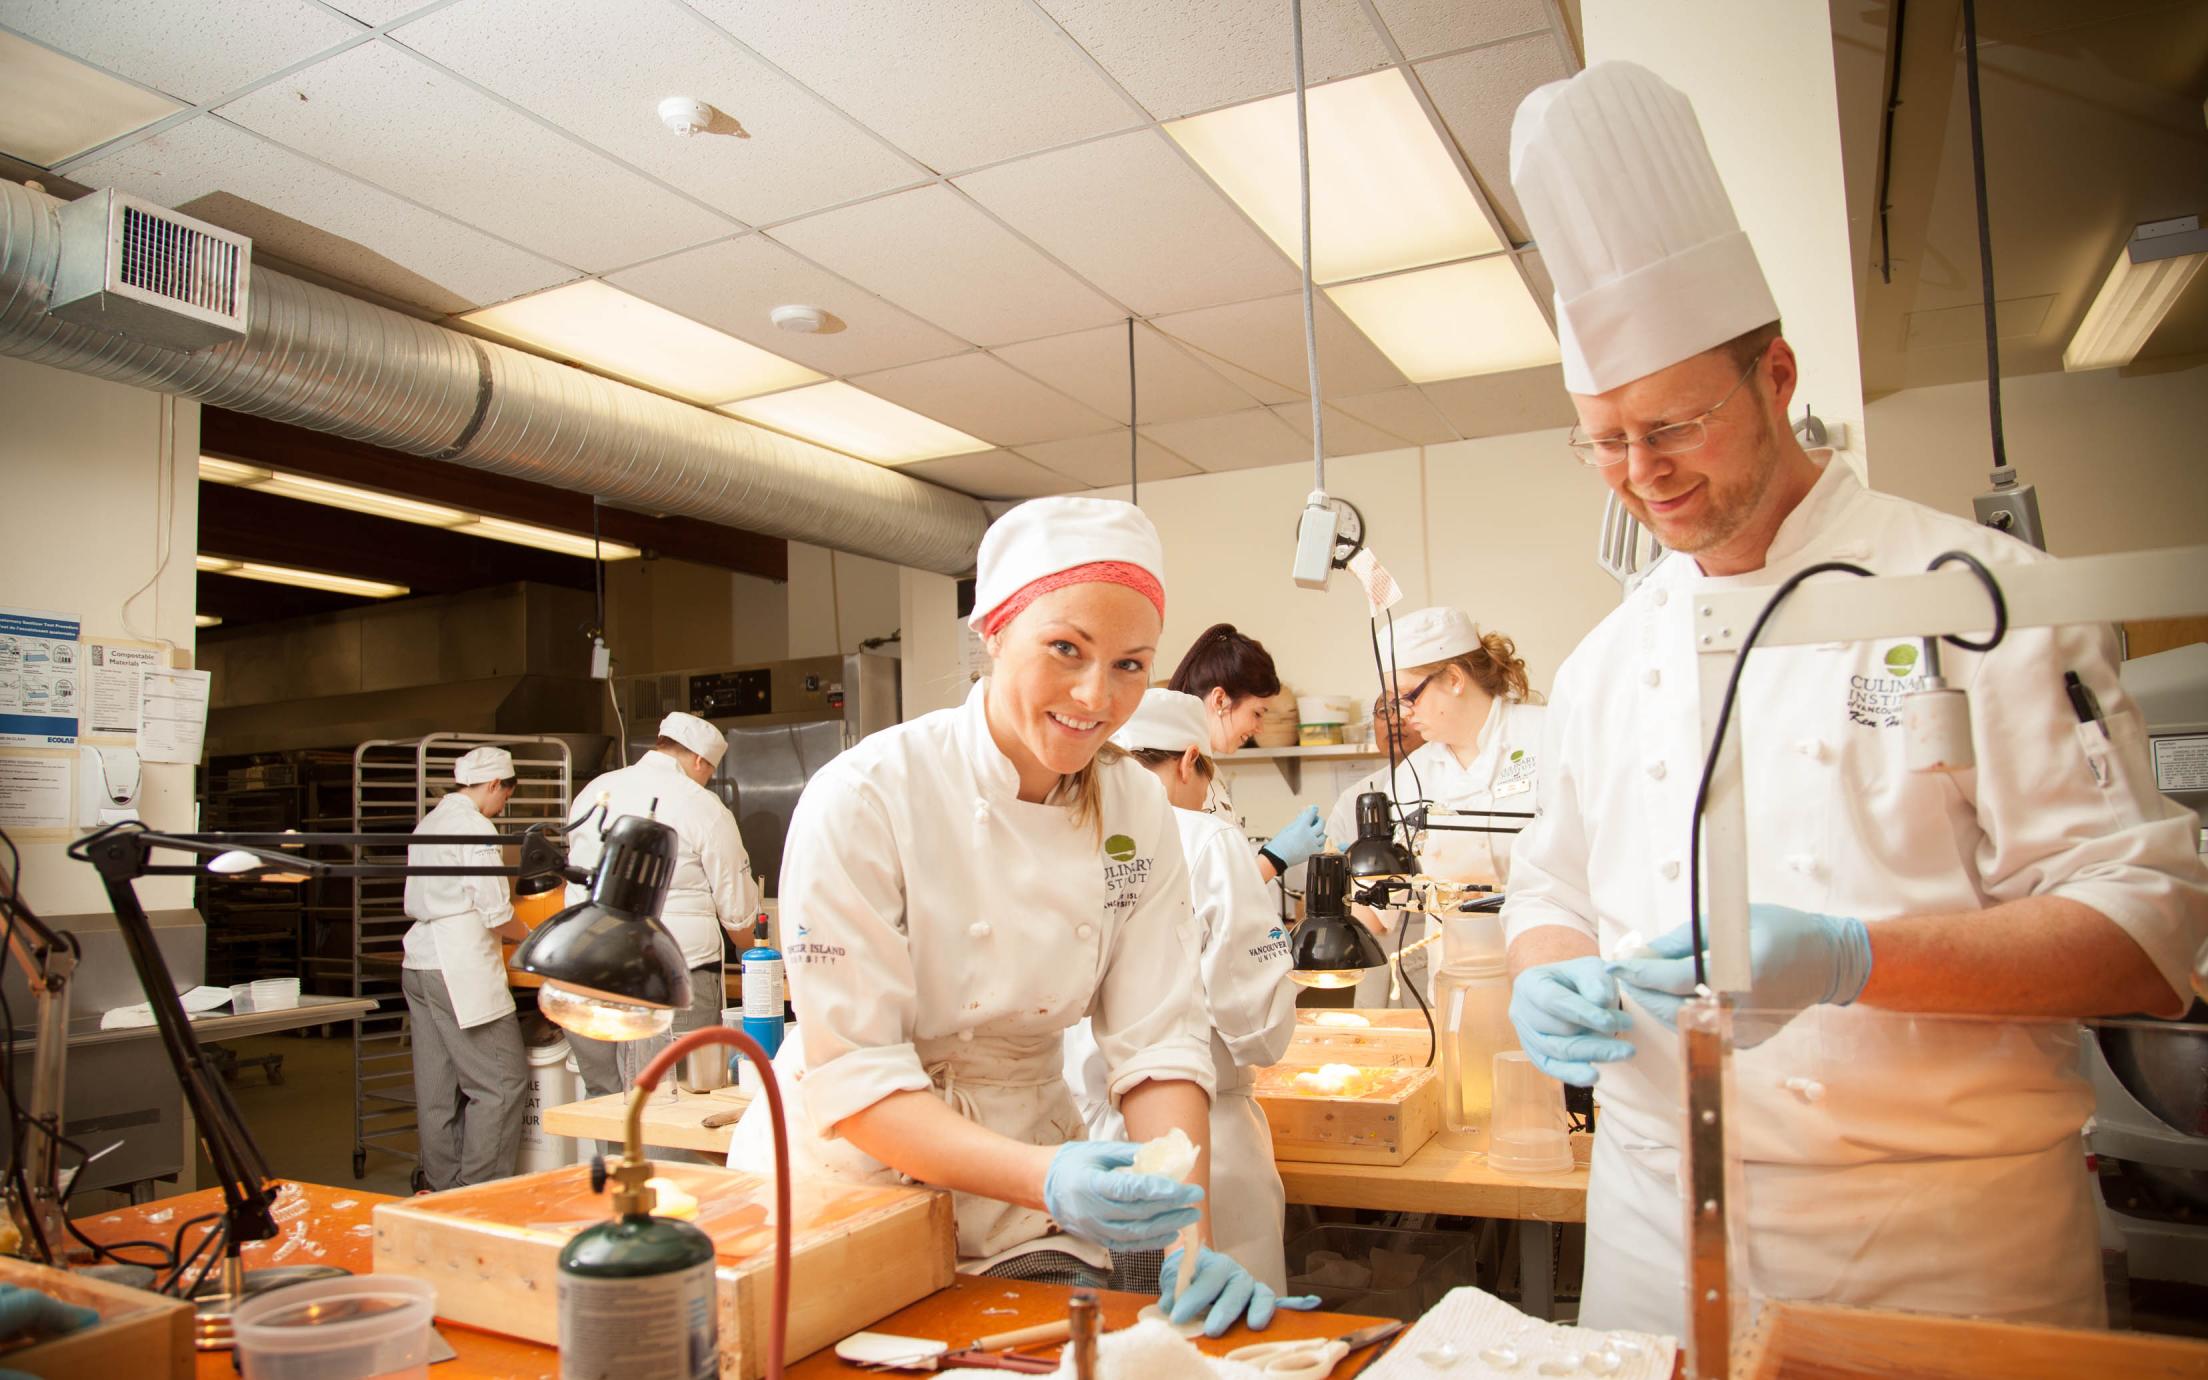 Students of the Professional Baking and Pastry Arts program decorating tasty treats at VIU's baking school